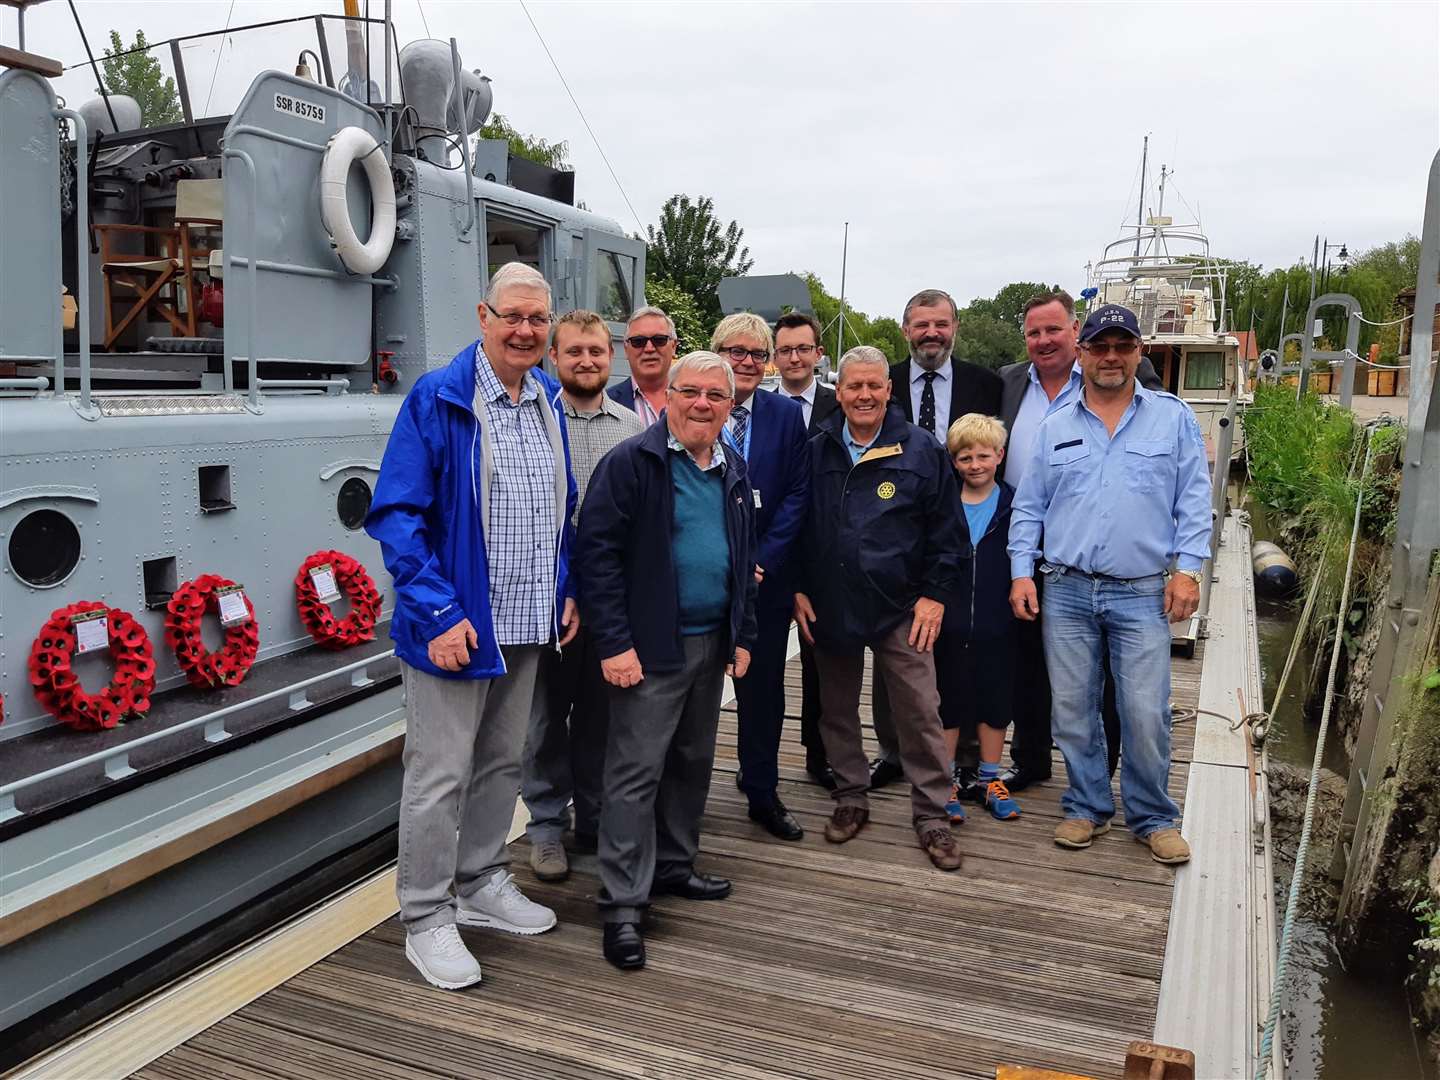 Representatives from Sandwich Town Council, Sandwich Local History Society and the Rotary Club attended